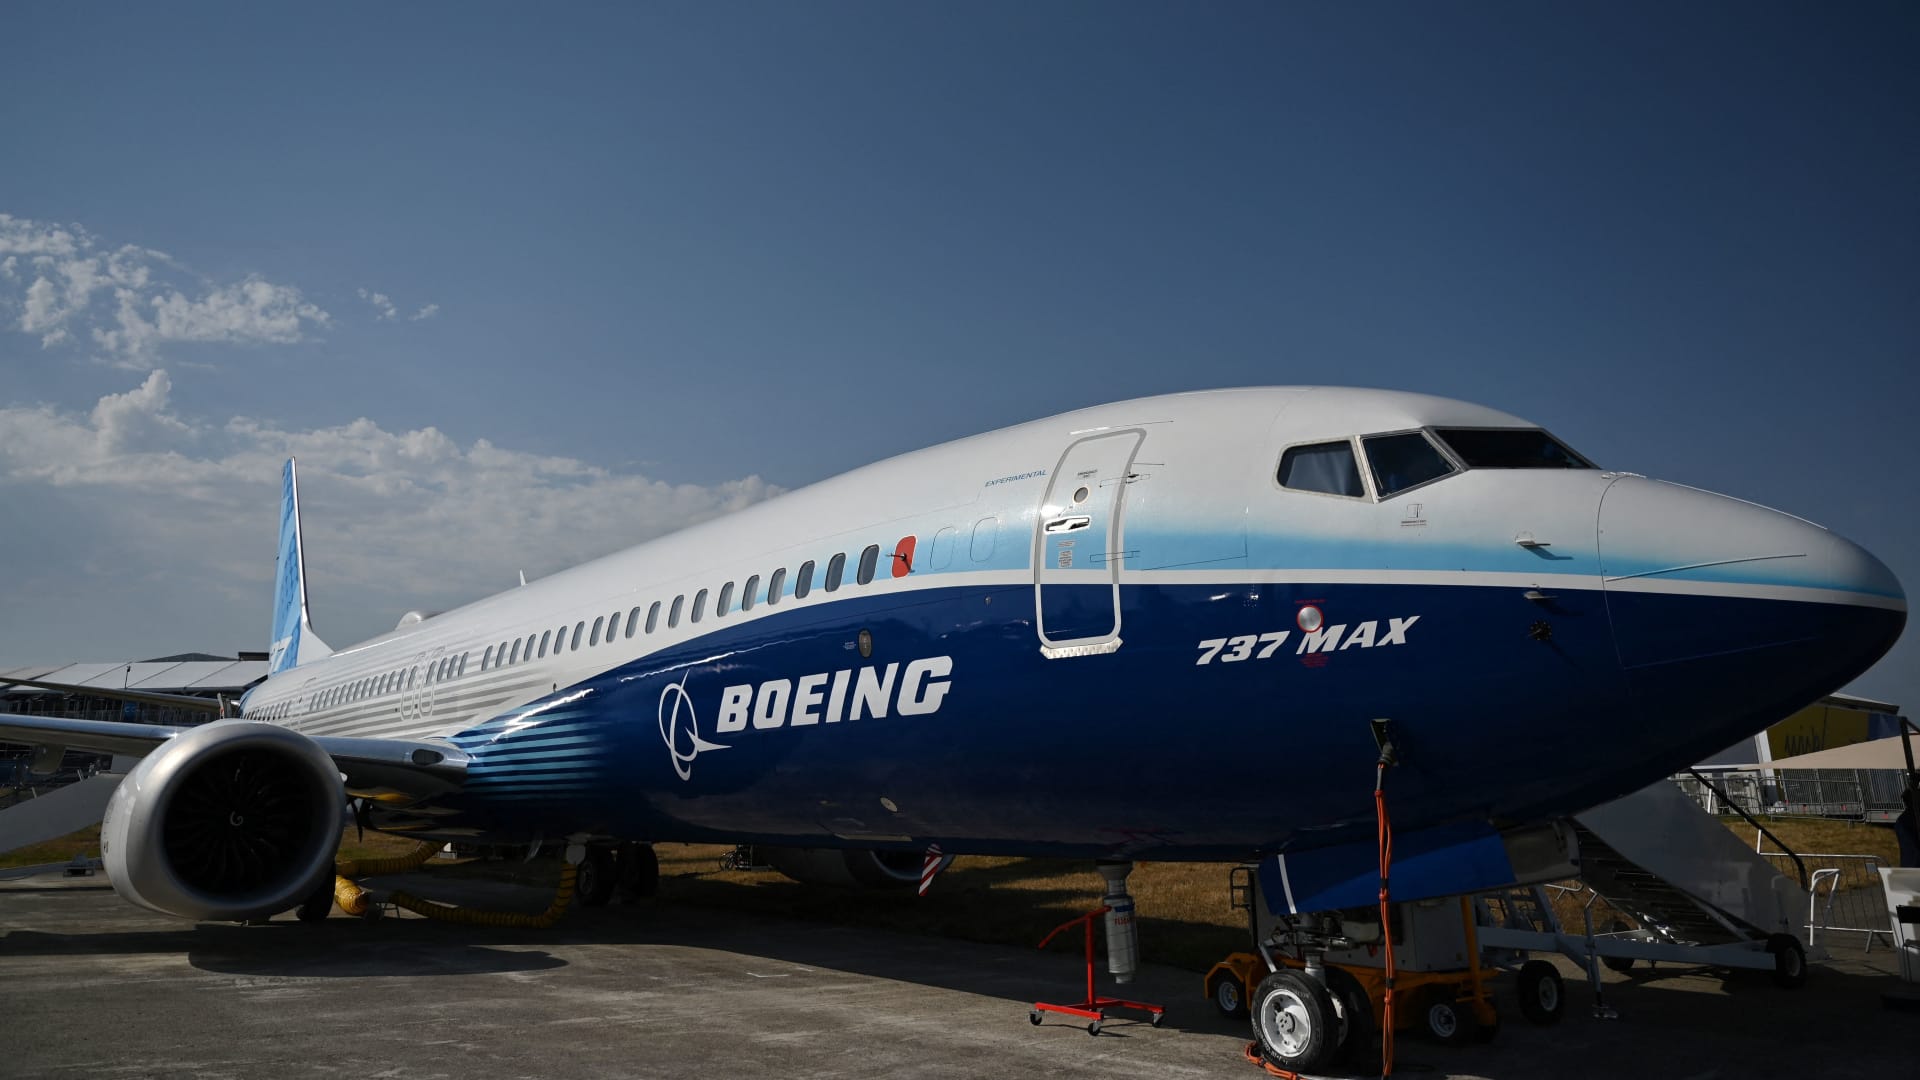 Boeing plans to boost 737 Max production to 38 planes per month despite manufacturing snag